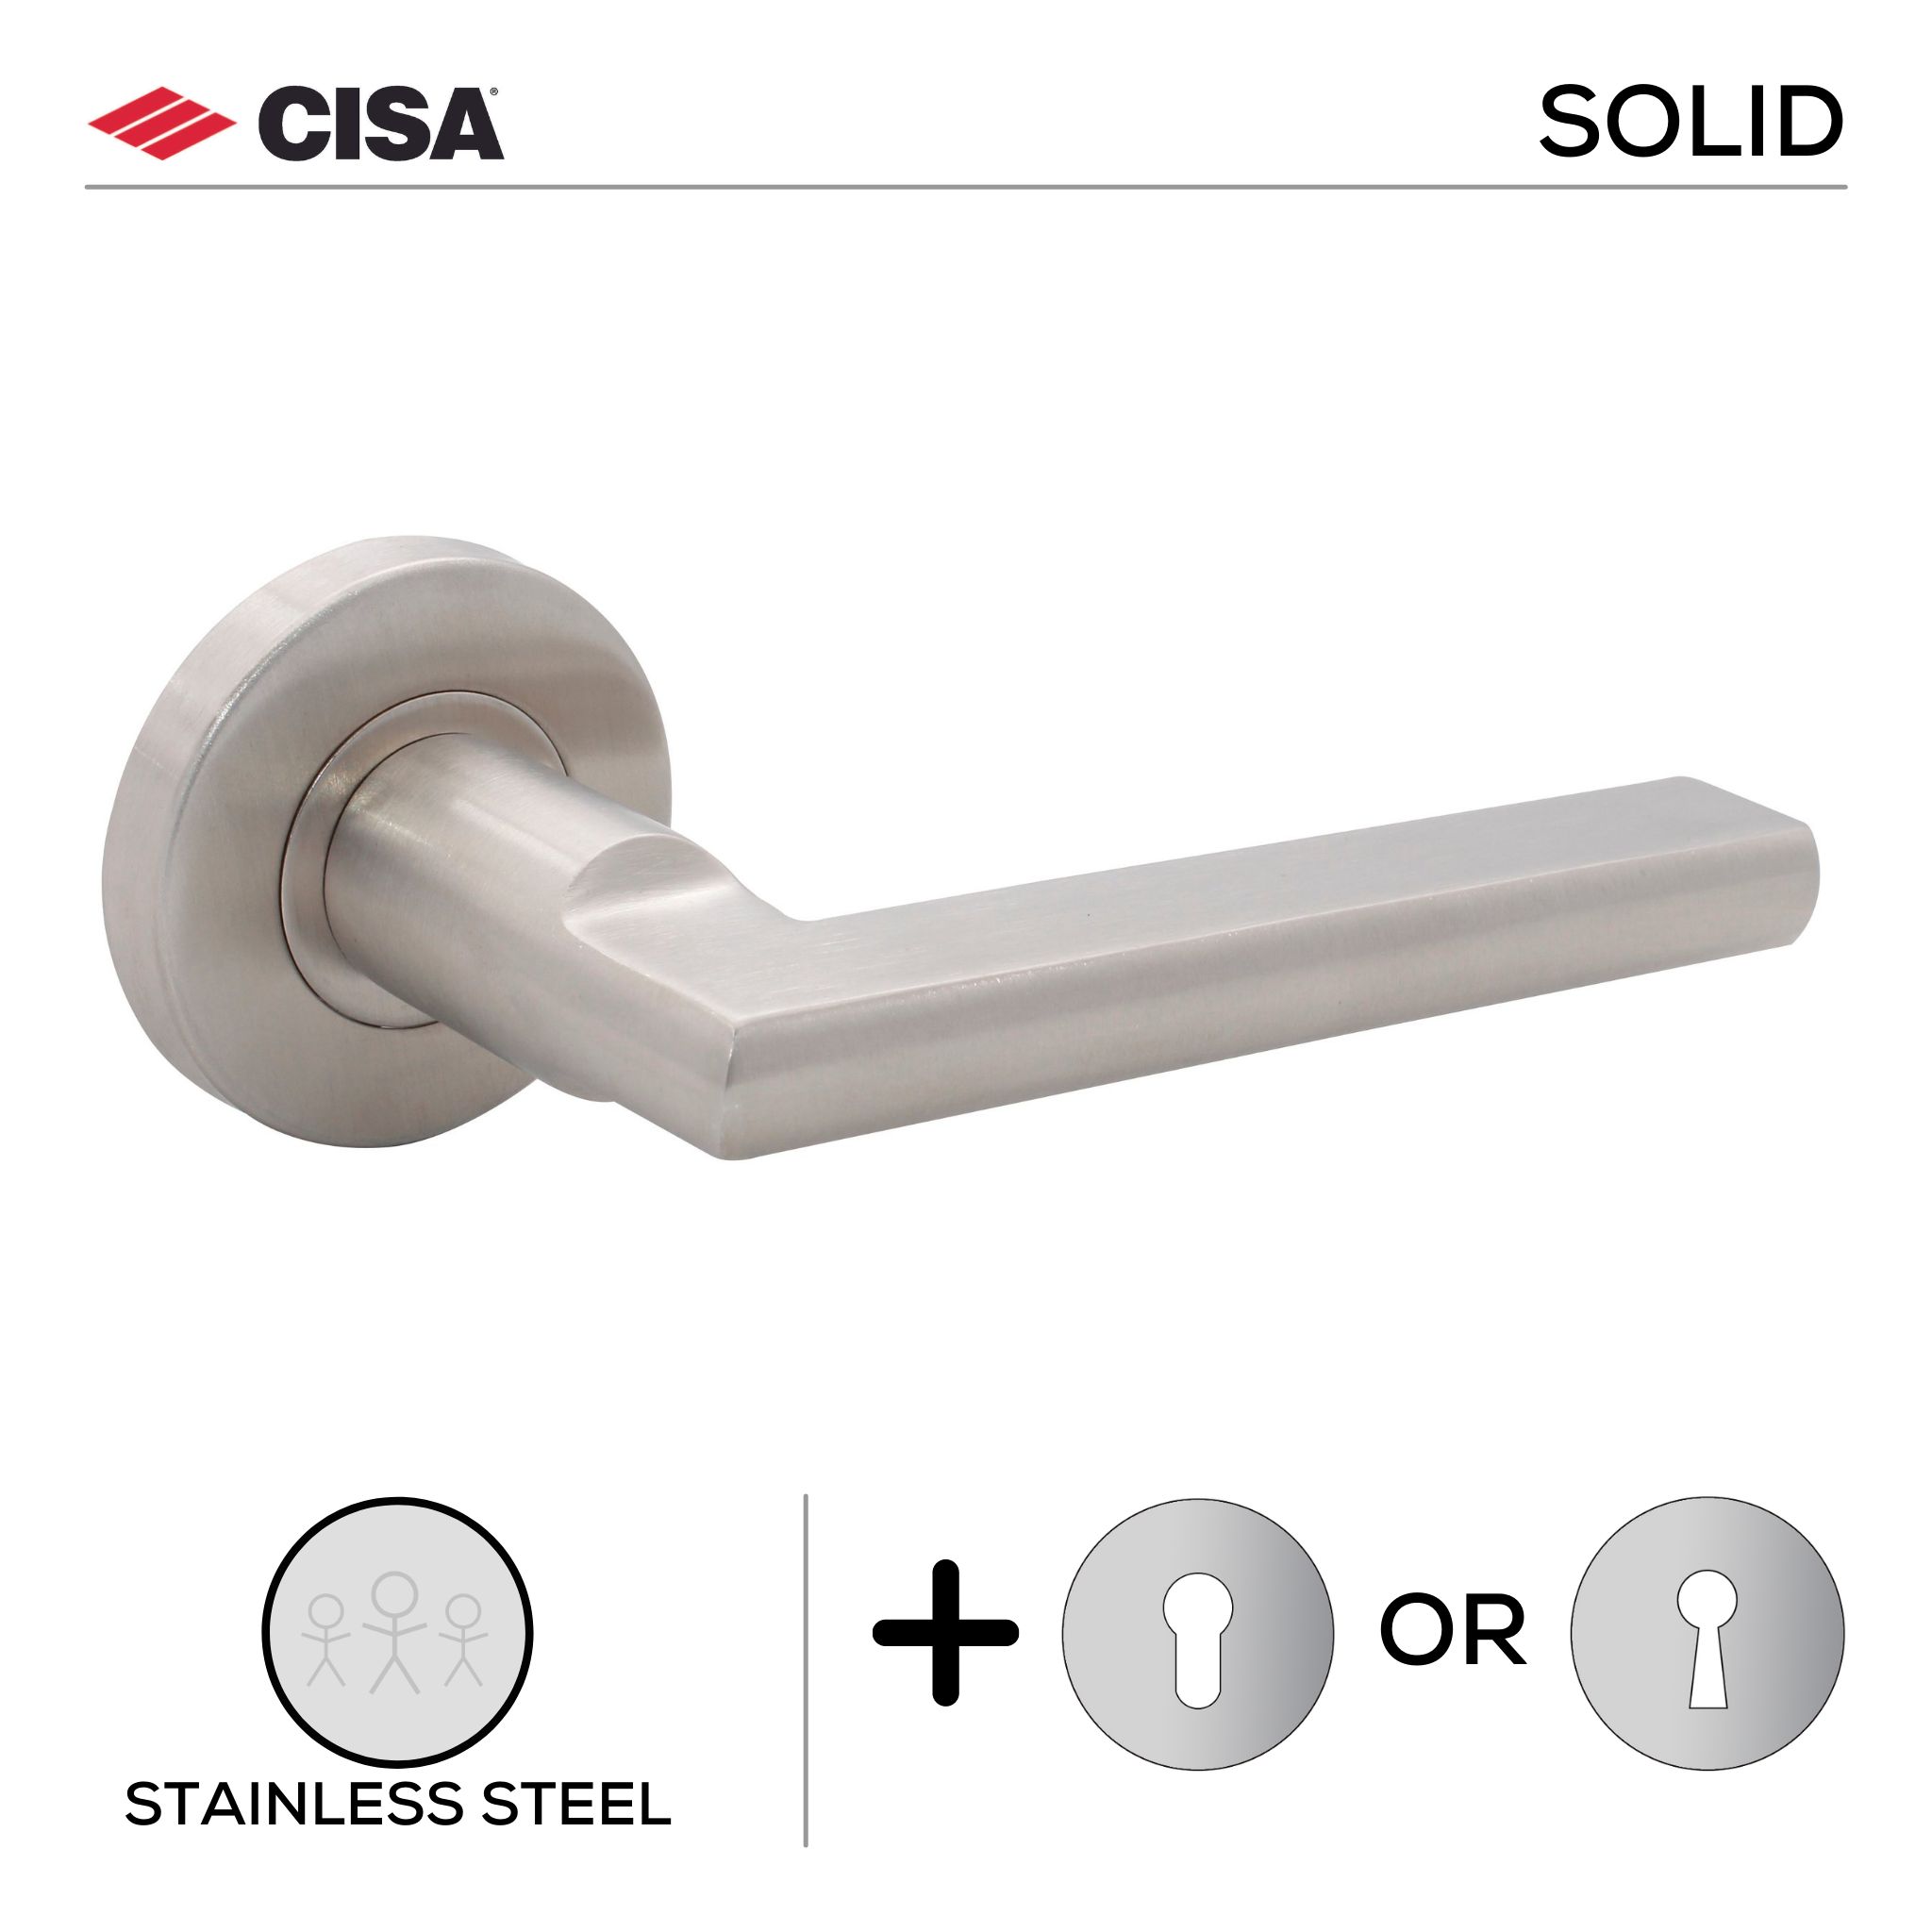 FS103.R._.SS, Lever Handles, Solid, On Round Rose, With Escutcheons, 134mm (l), Stainless Steel, CISA